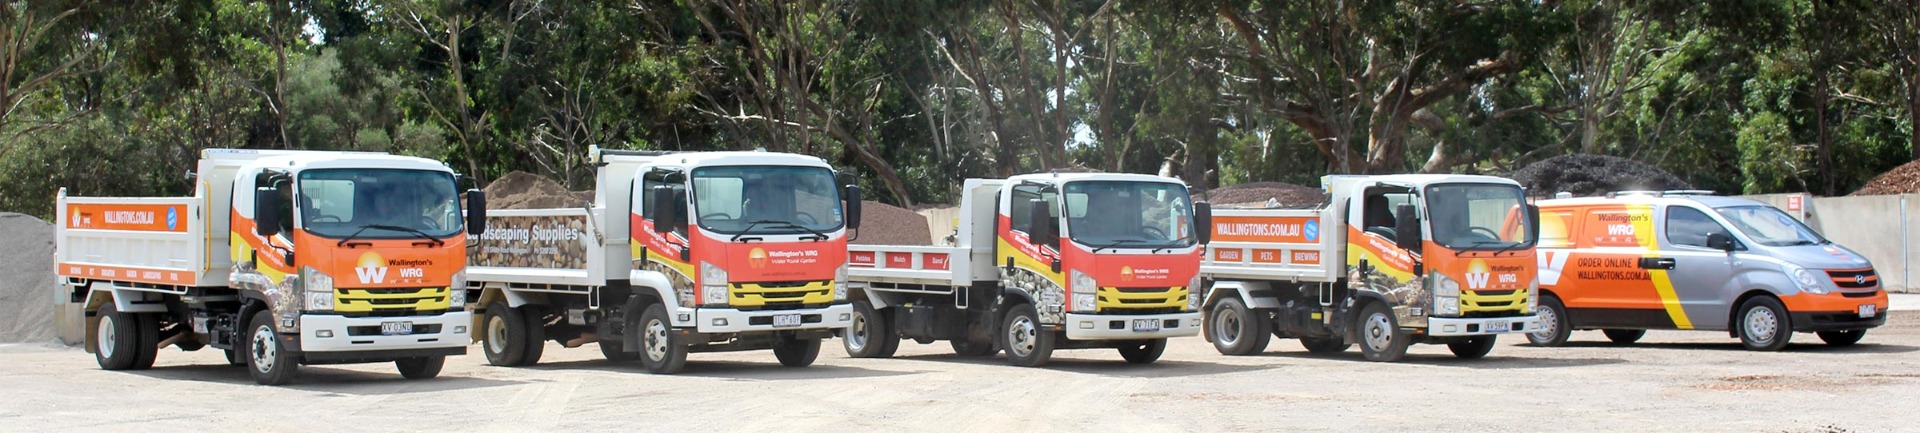 Geelong landscape supplies delivery service